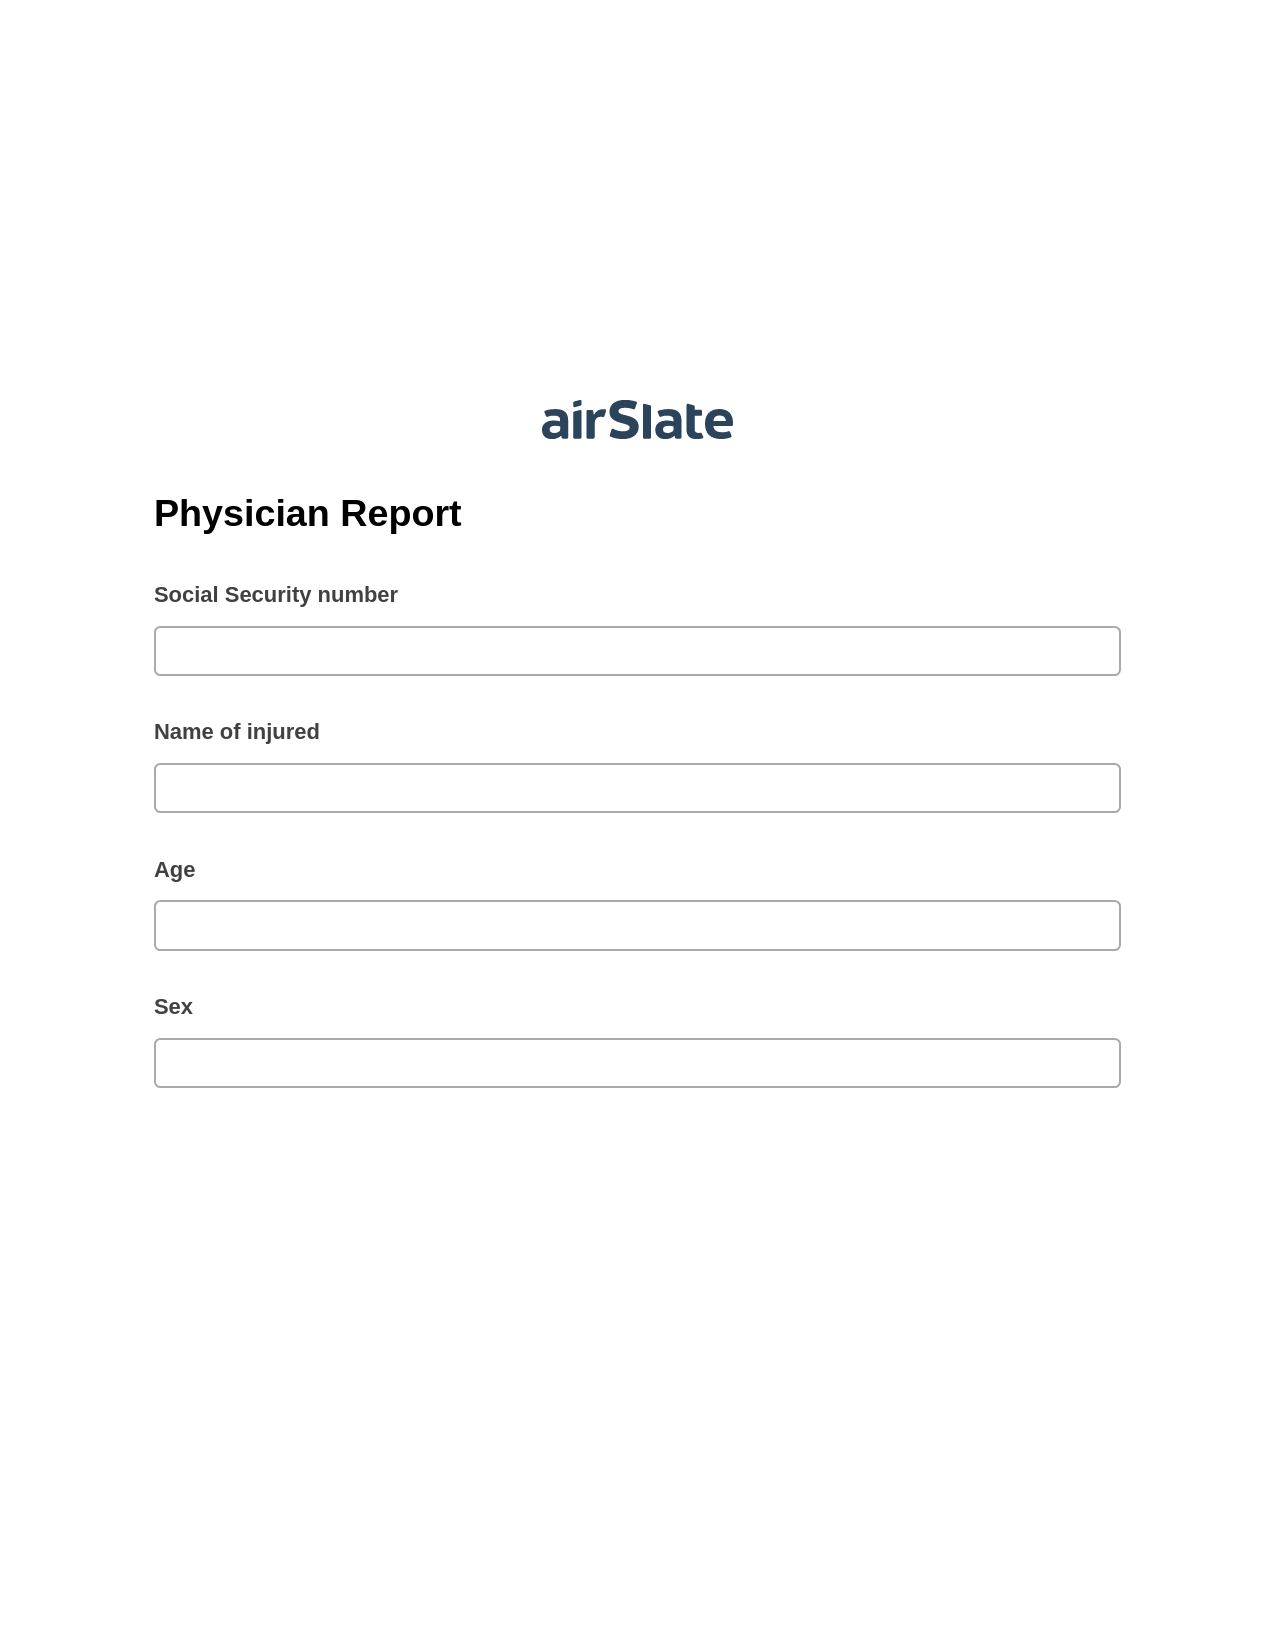 Multirole Physician Report Pre-fill Dropdowns from Airtable, Invoke Salesforce Process Bot, Archive to Google Drive Bot